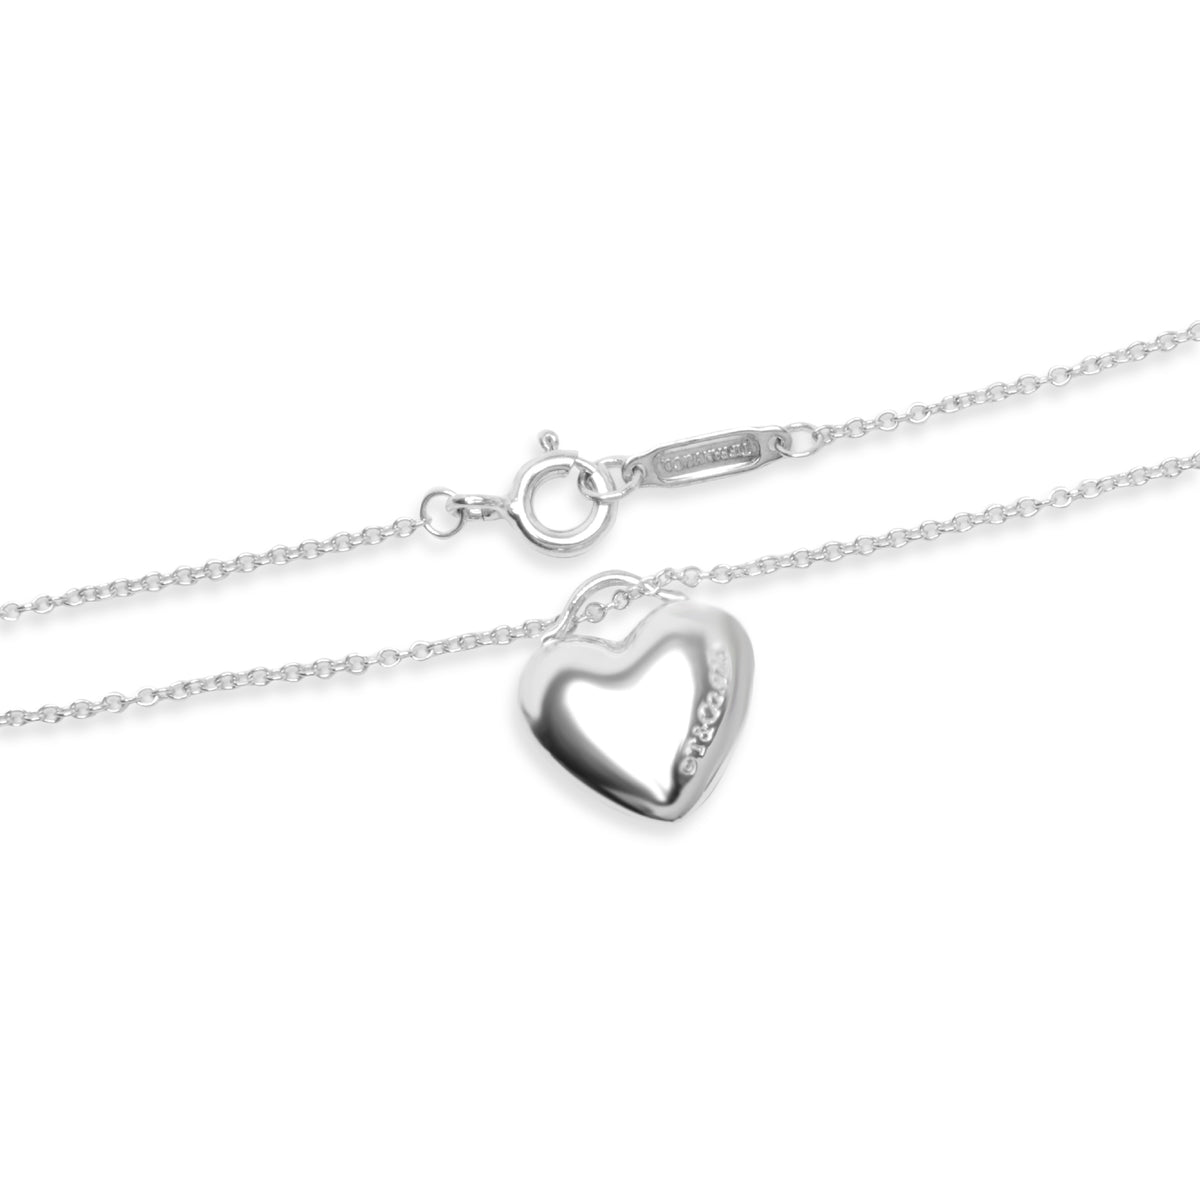 Tiffany & Co. Puffy Heart Pendant in  Sterling Silver